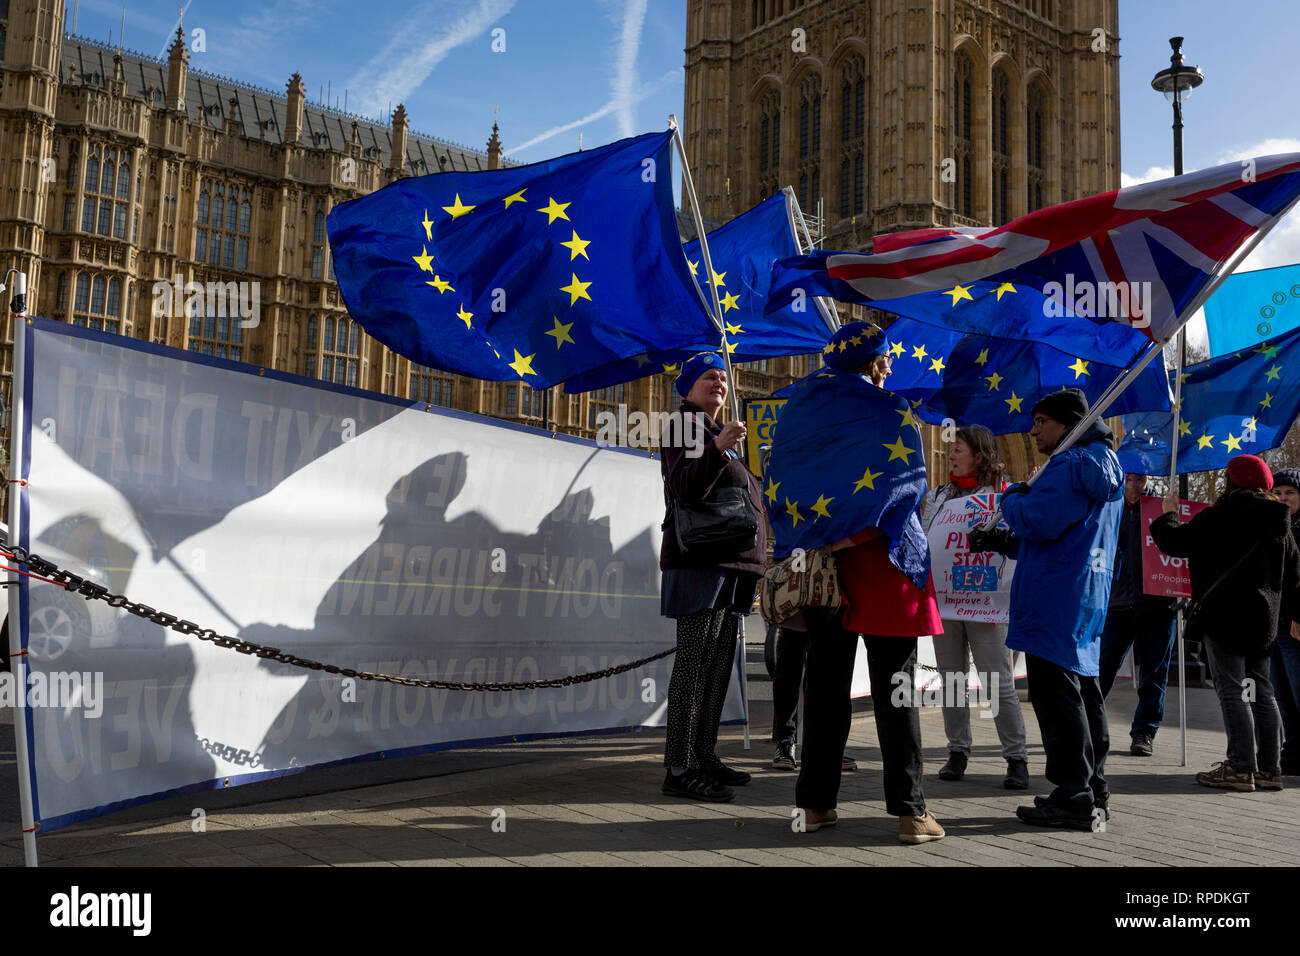 Pro-EU campaigners stand with EU flags opposite parliament during the continuing protest against Brexit, on 19th February 2019, in London, England. Stock Photo